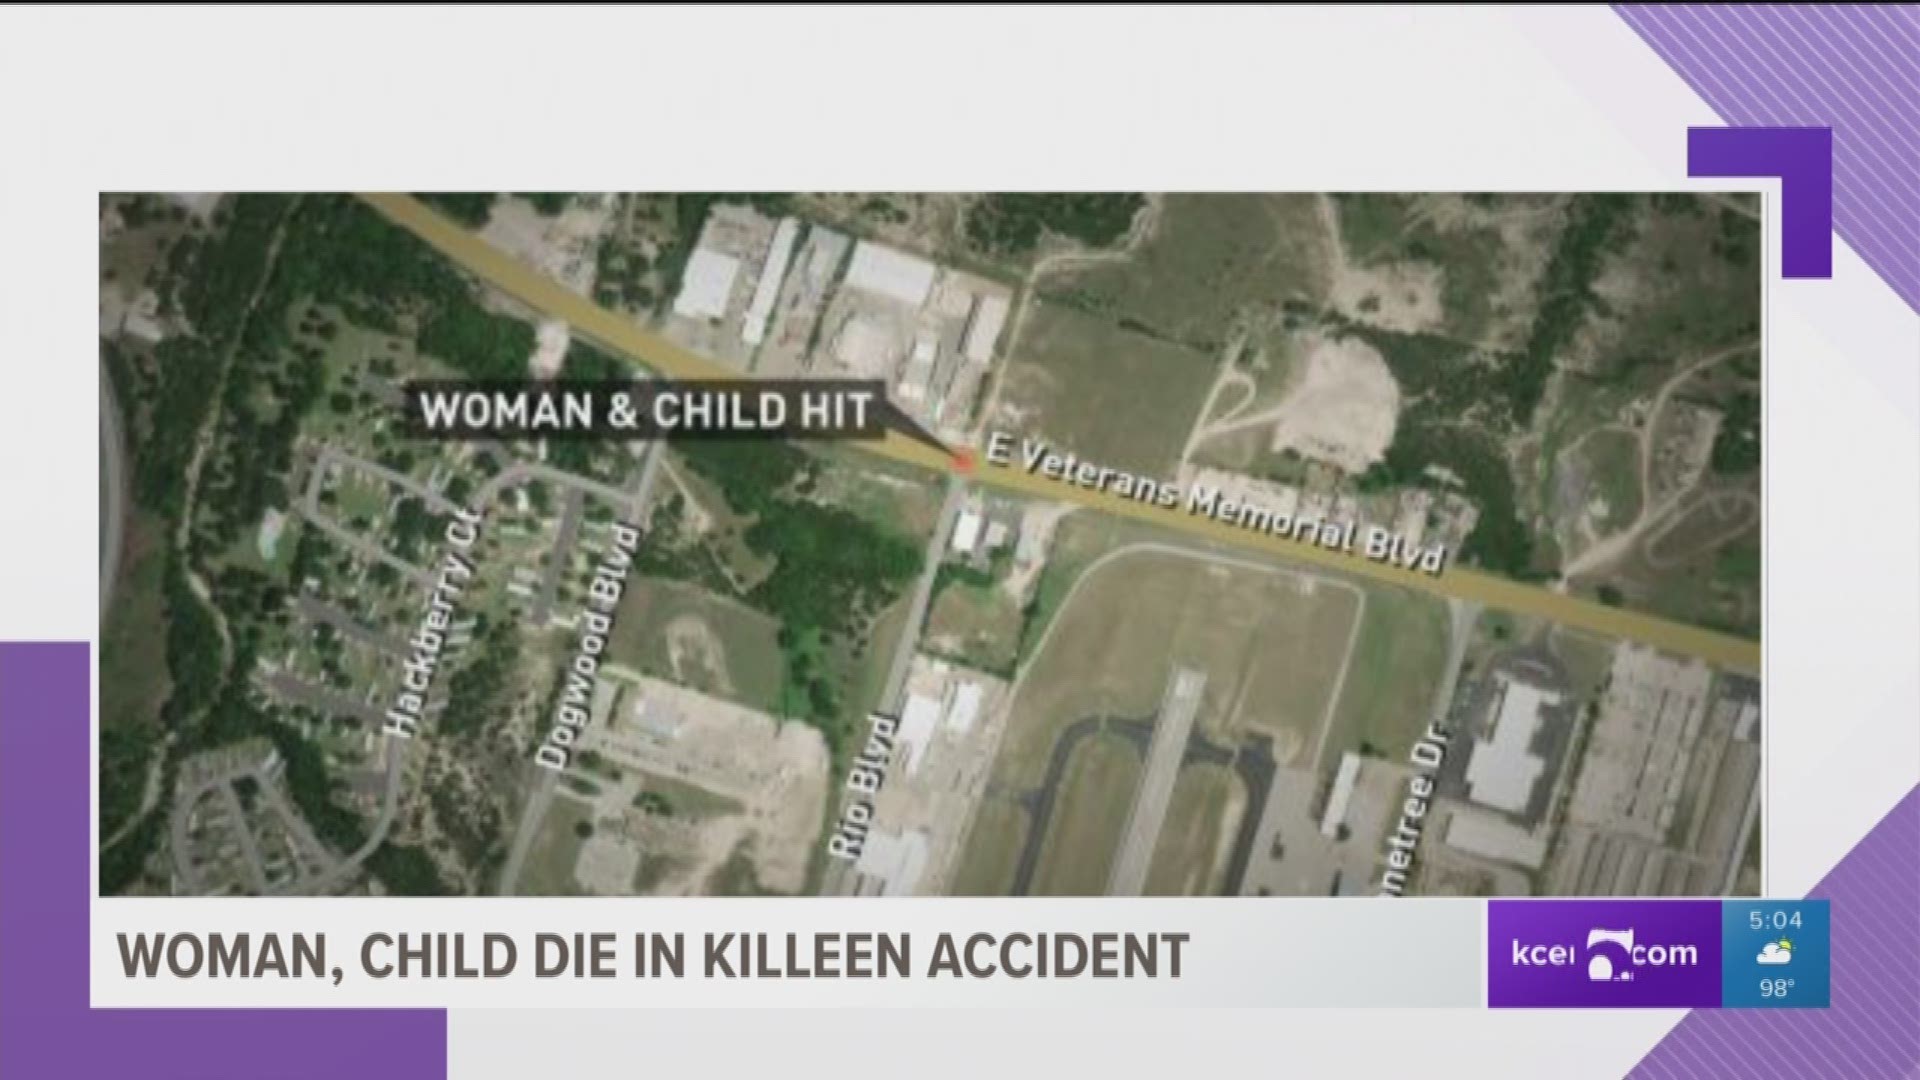 A woman and young child were hit and killed in Killeen walking in the street. 